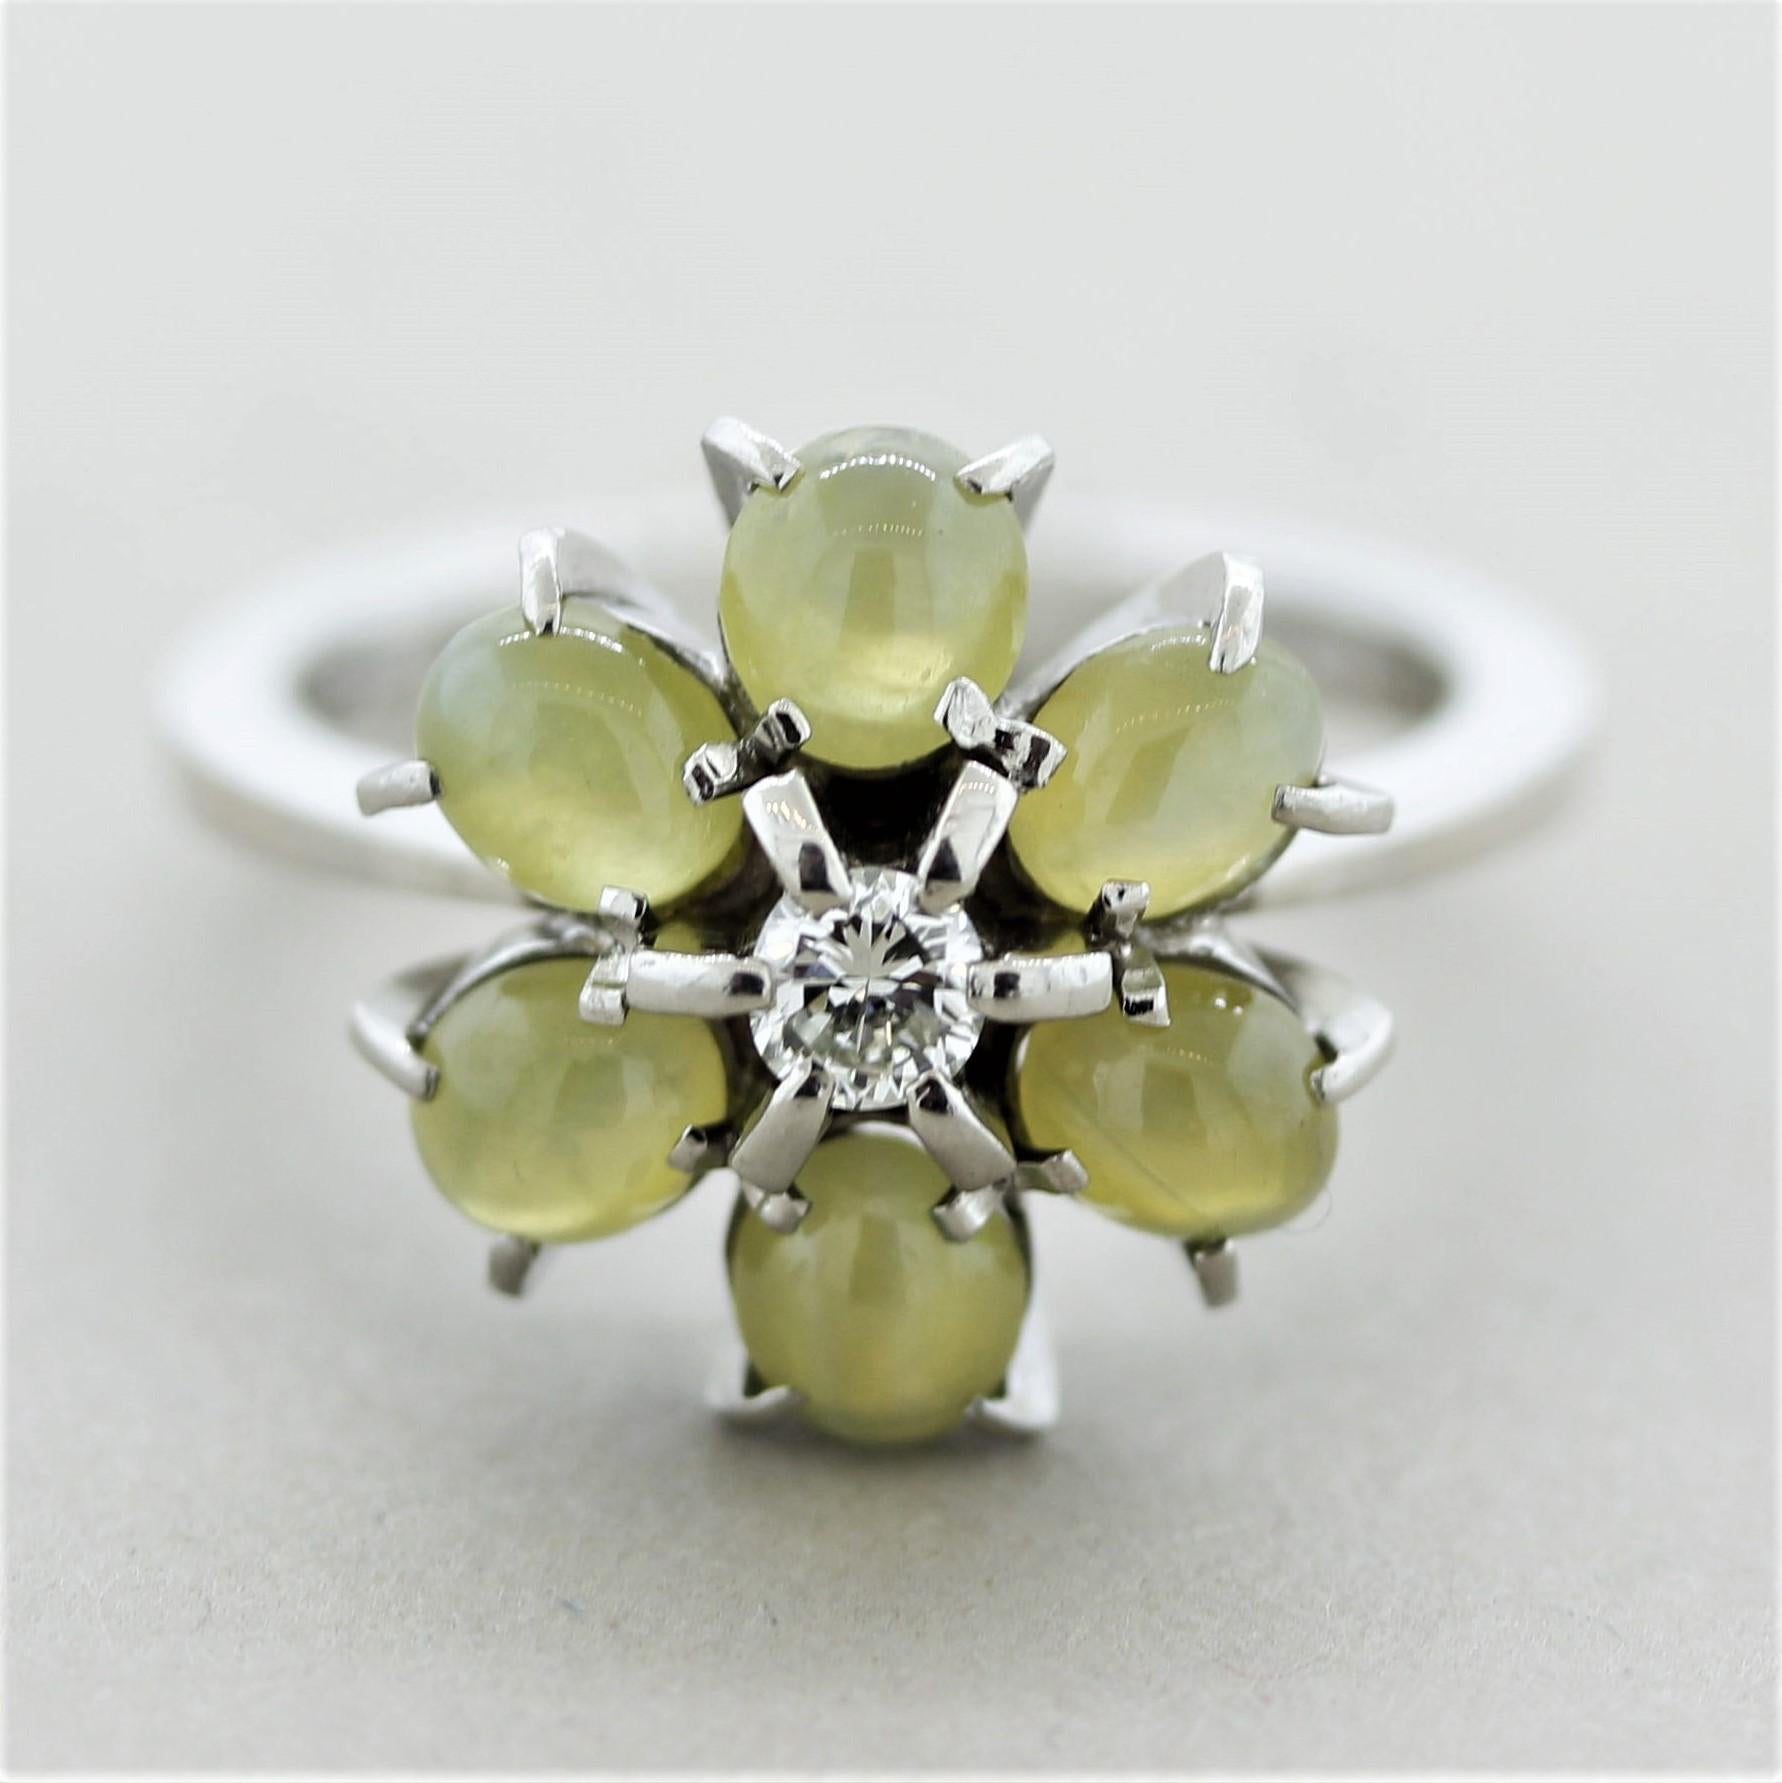 A super unique and stylish platinum ring. It features 6 cat’s eye chrysoberyl, each with a strong and defined cat’s eye and weighs a total of 3.08 carats. They are set around a single round brilliant-cut diamond (0.16ct) which makes a lovely flower